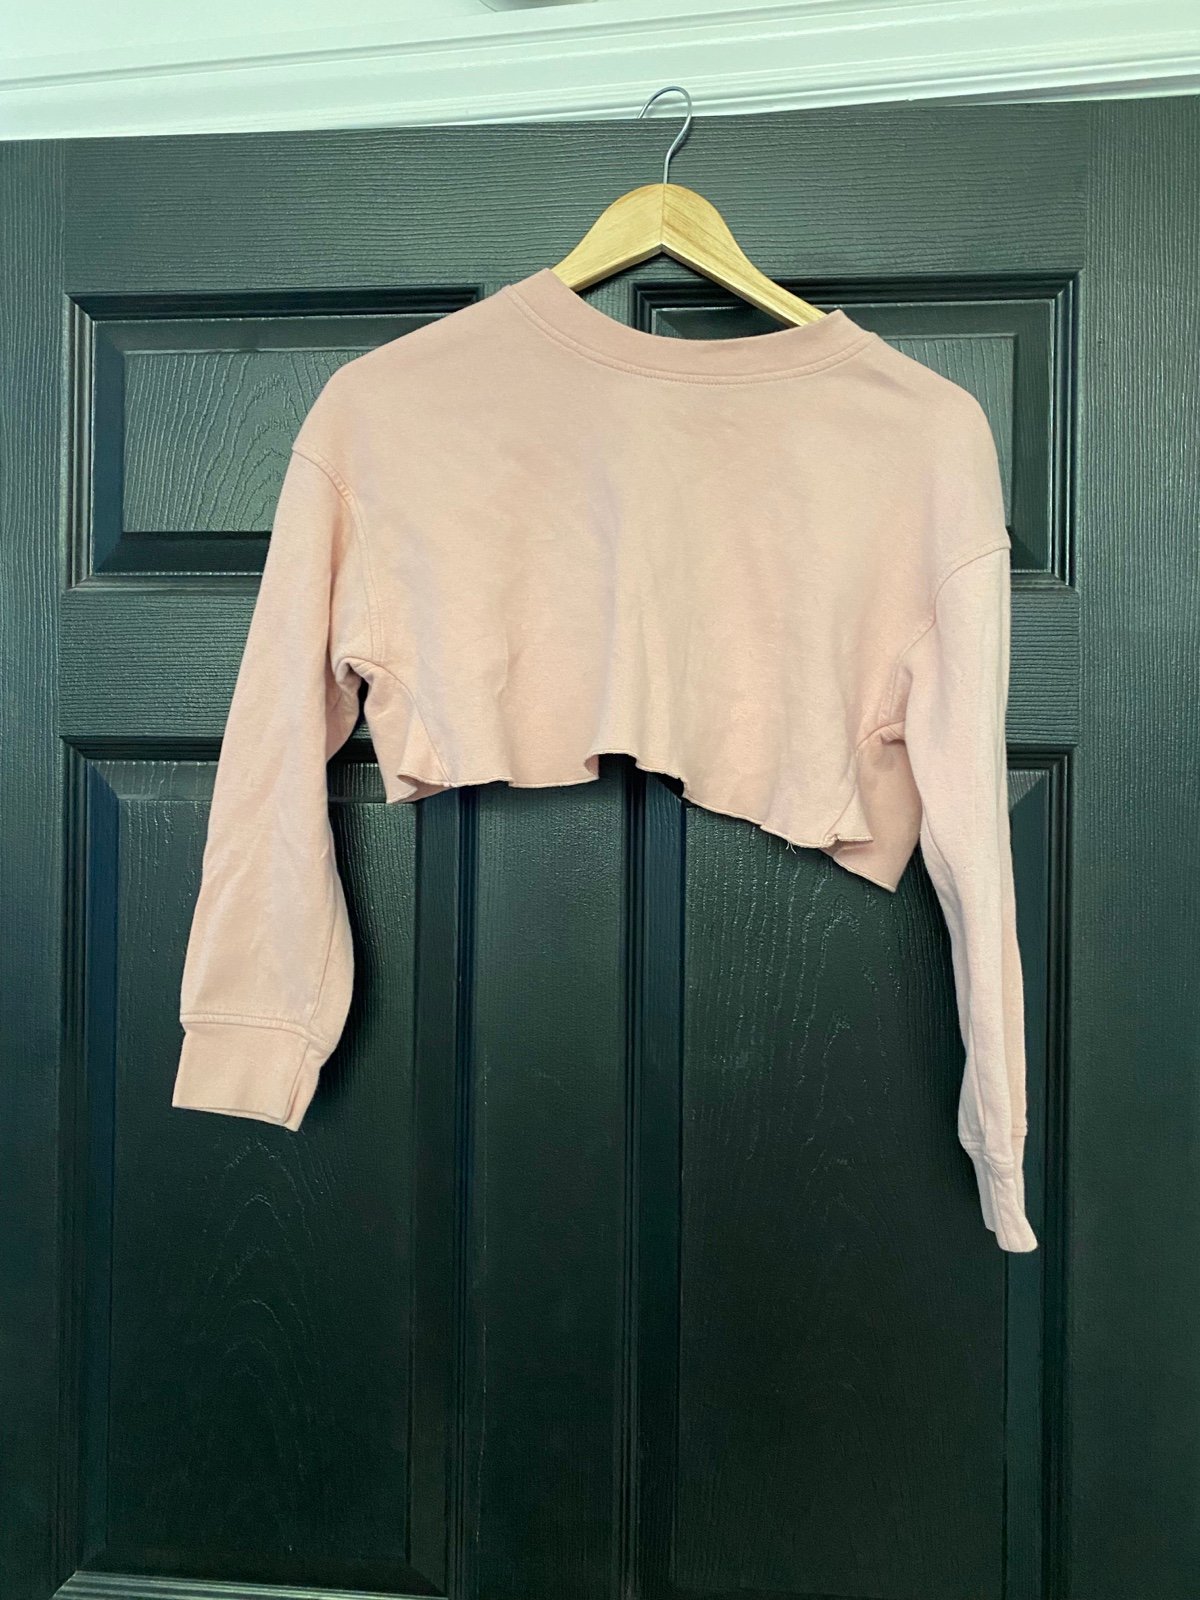 Stylish Light pink cropped sweatshirt top nDvfqo3ia Everyday Low Prices